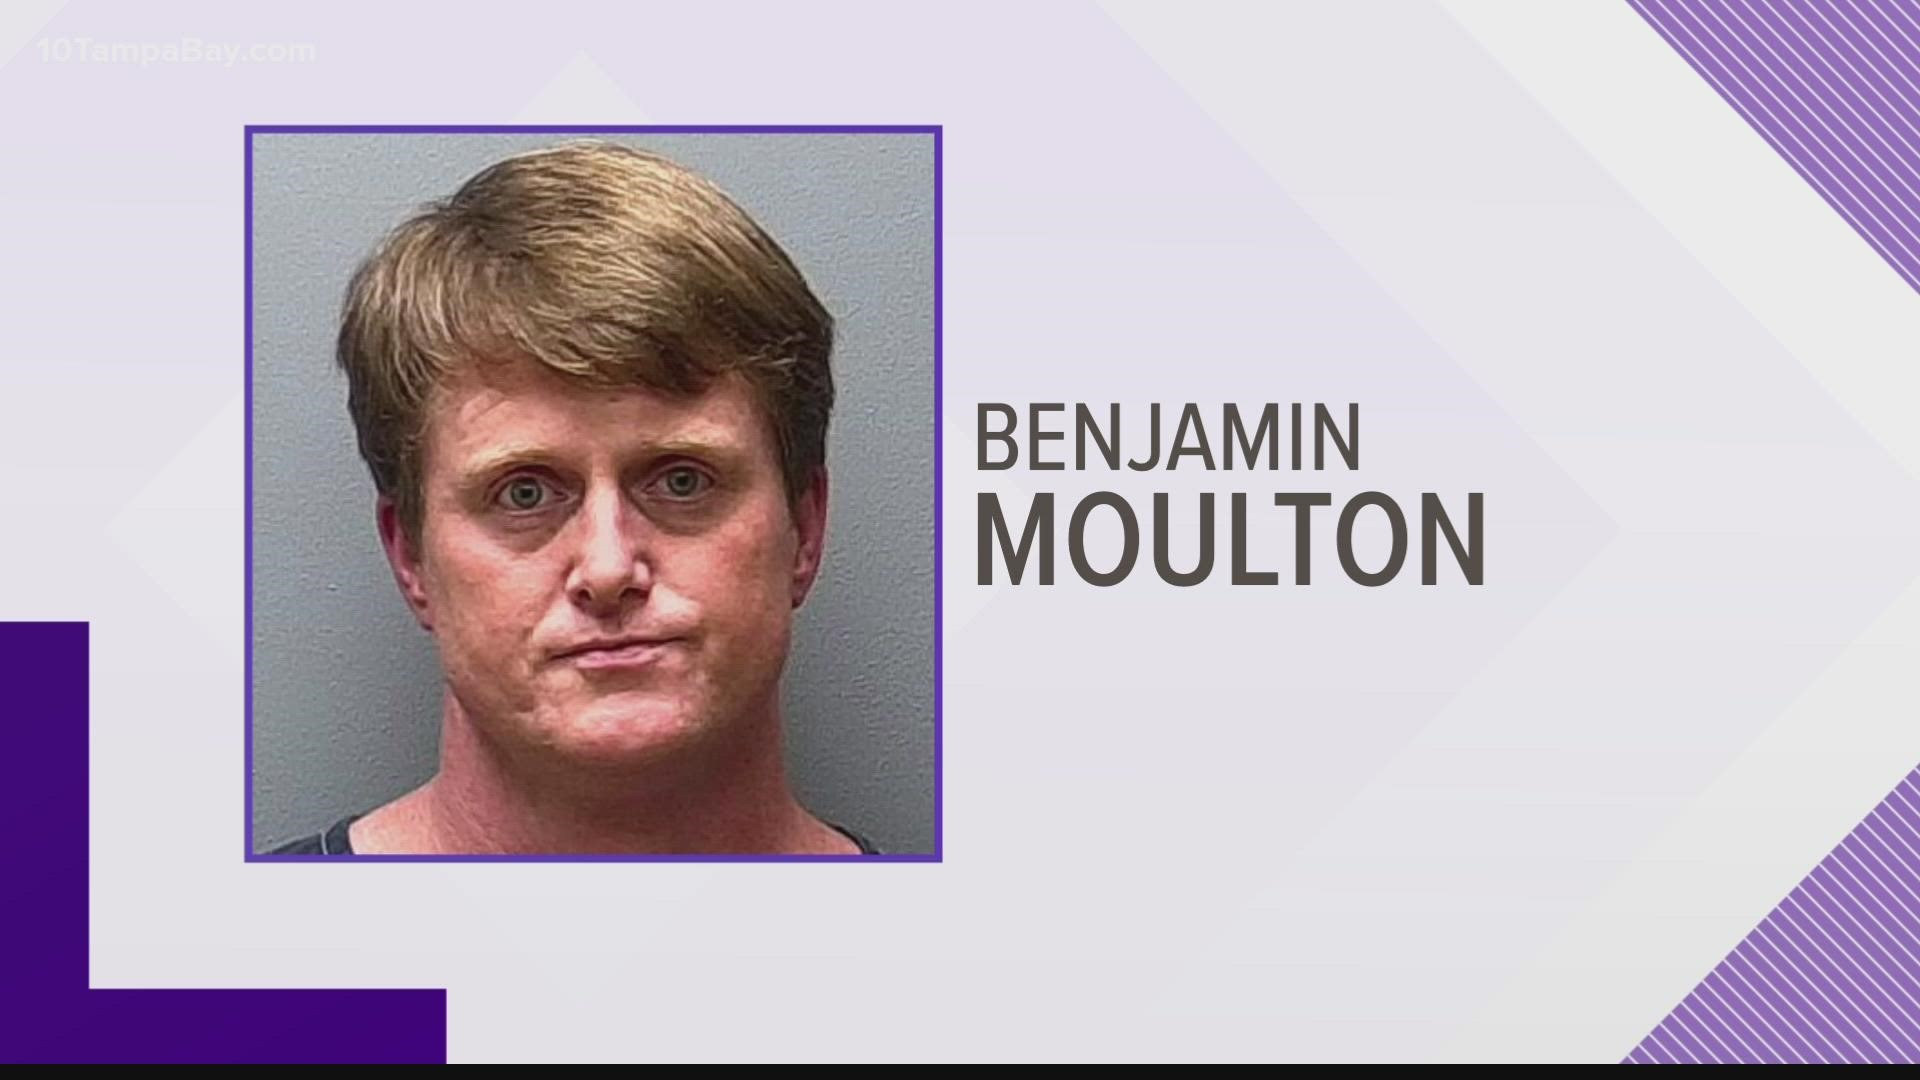 Detectives say Benjamin Moulton told them he killed Nicole Scott in a "fit of rage" nearly 10 years ago.